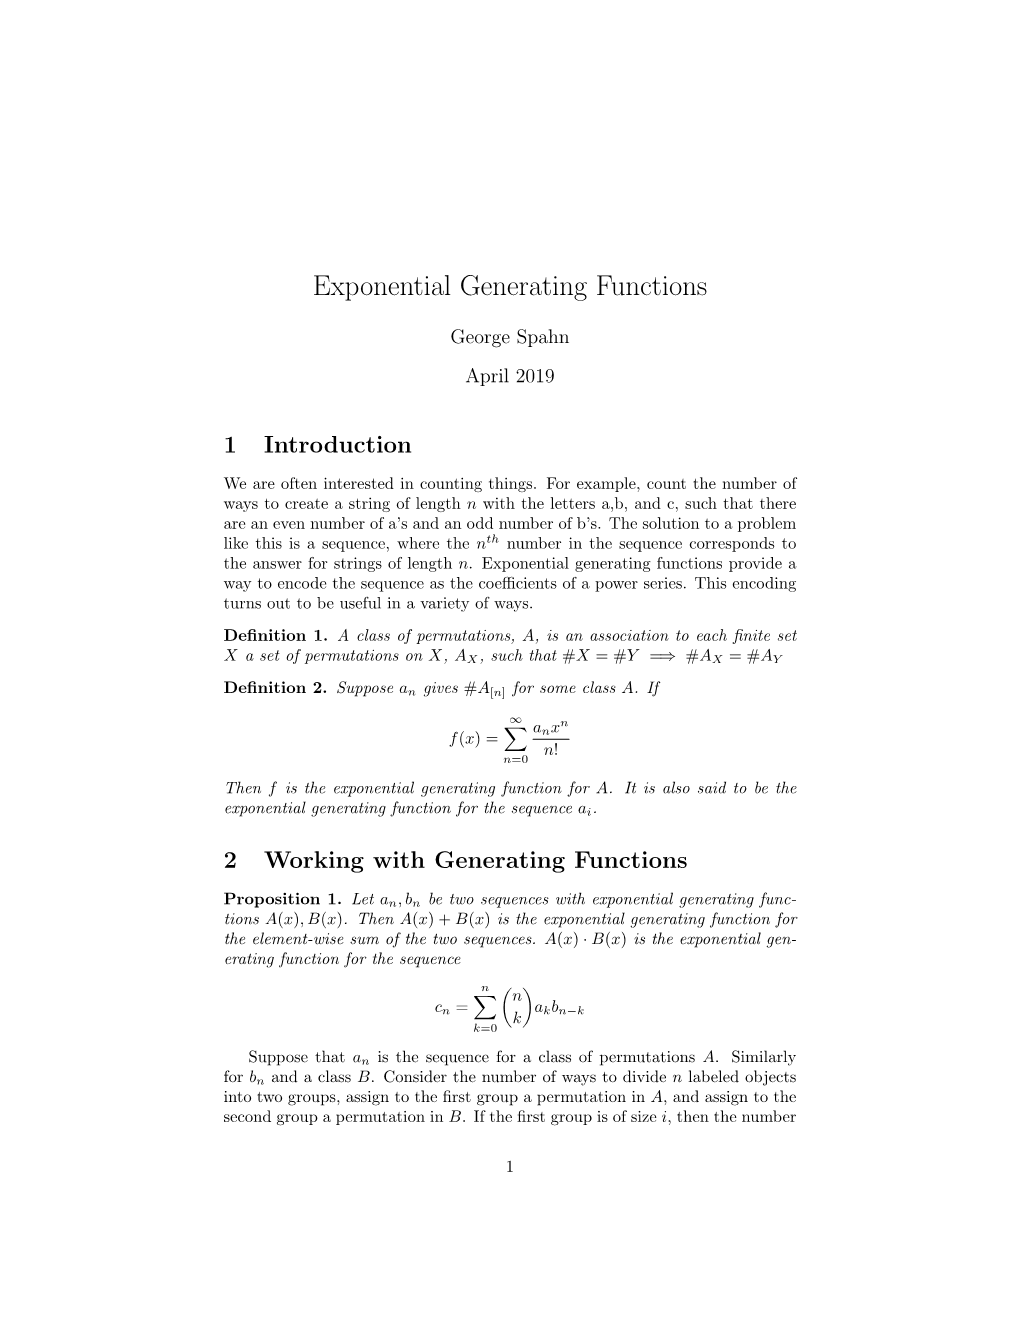 Exponential Generating Functions